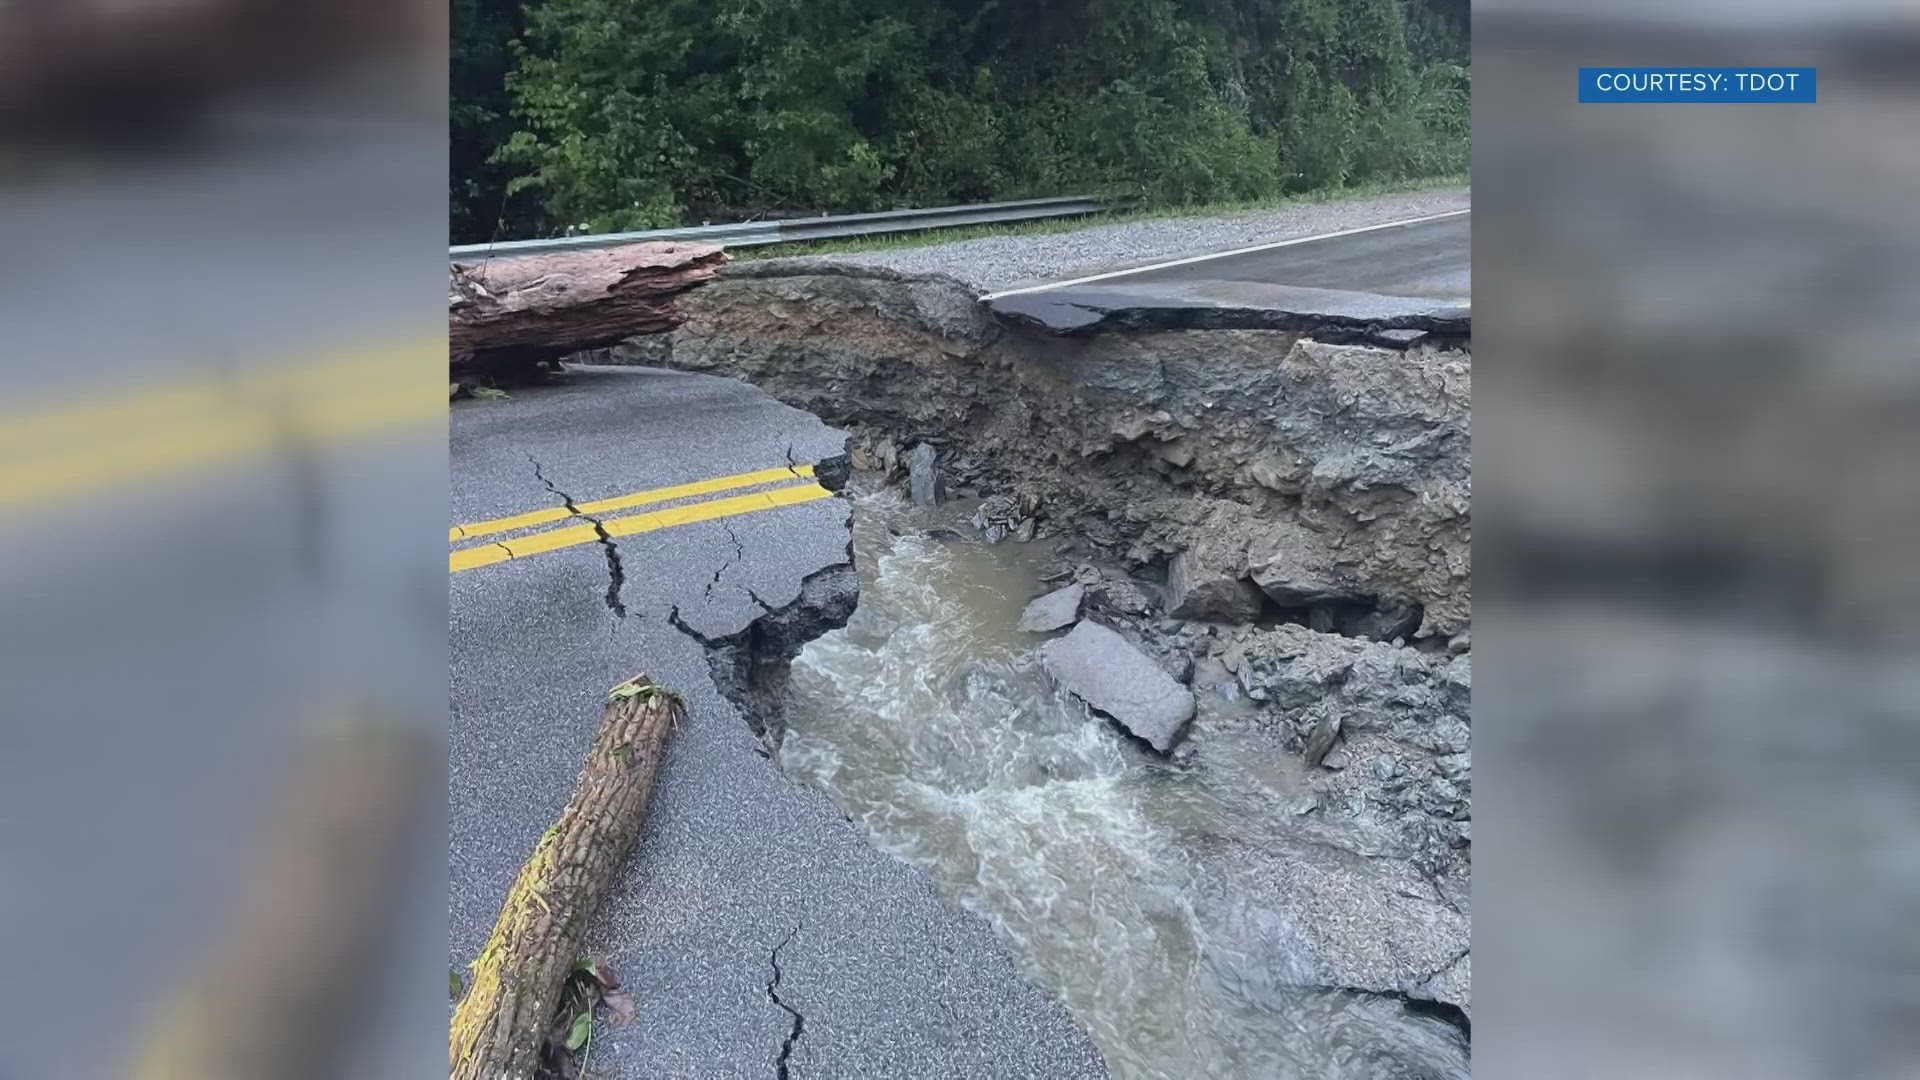 A spokesperson with the national park said the main path to Tellico River Rd. will be closed for the foreseeable future.